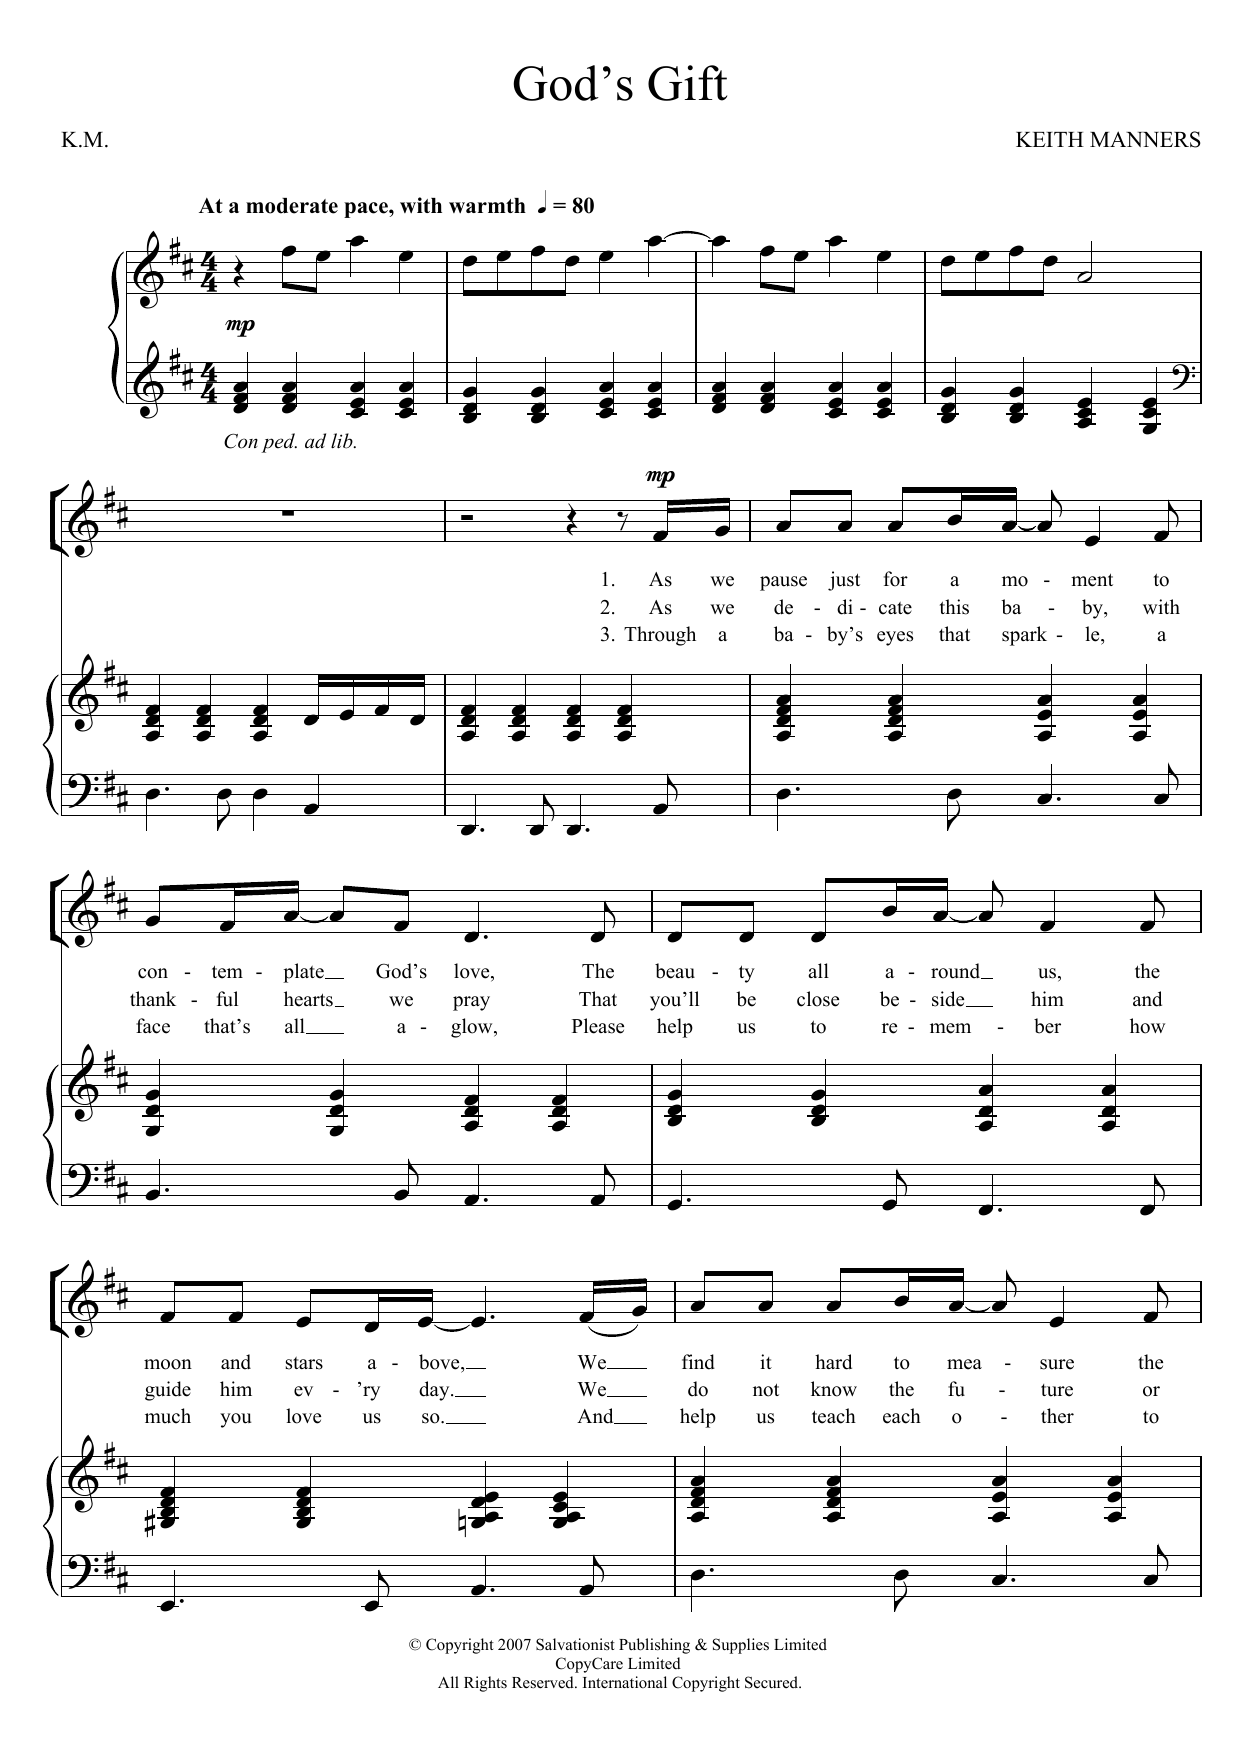 The Salvation Army God's Gift Sheet Music